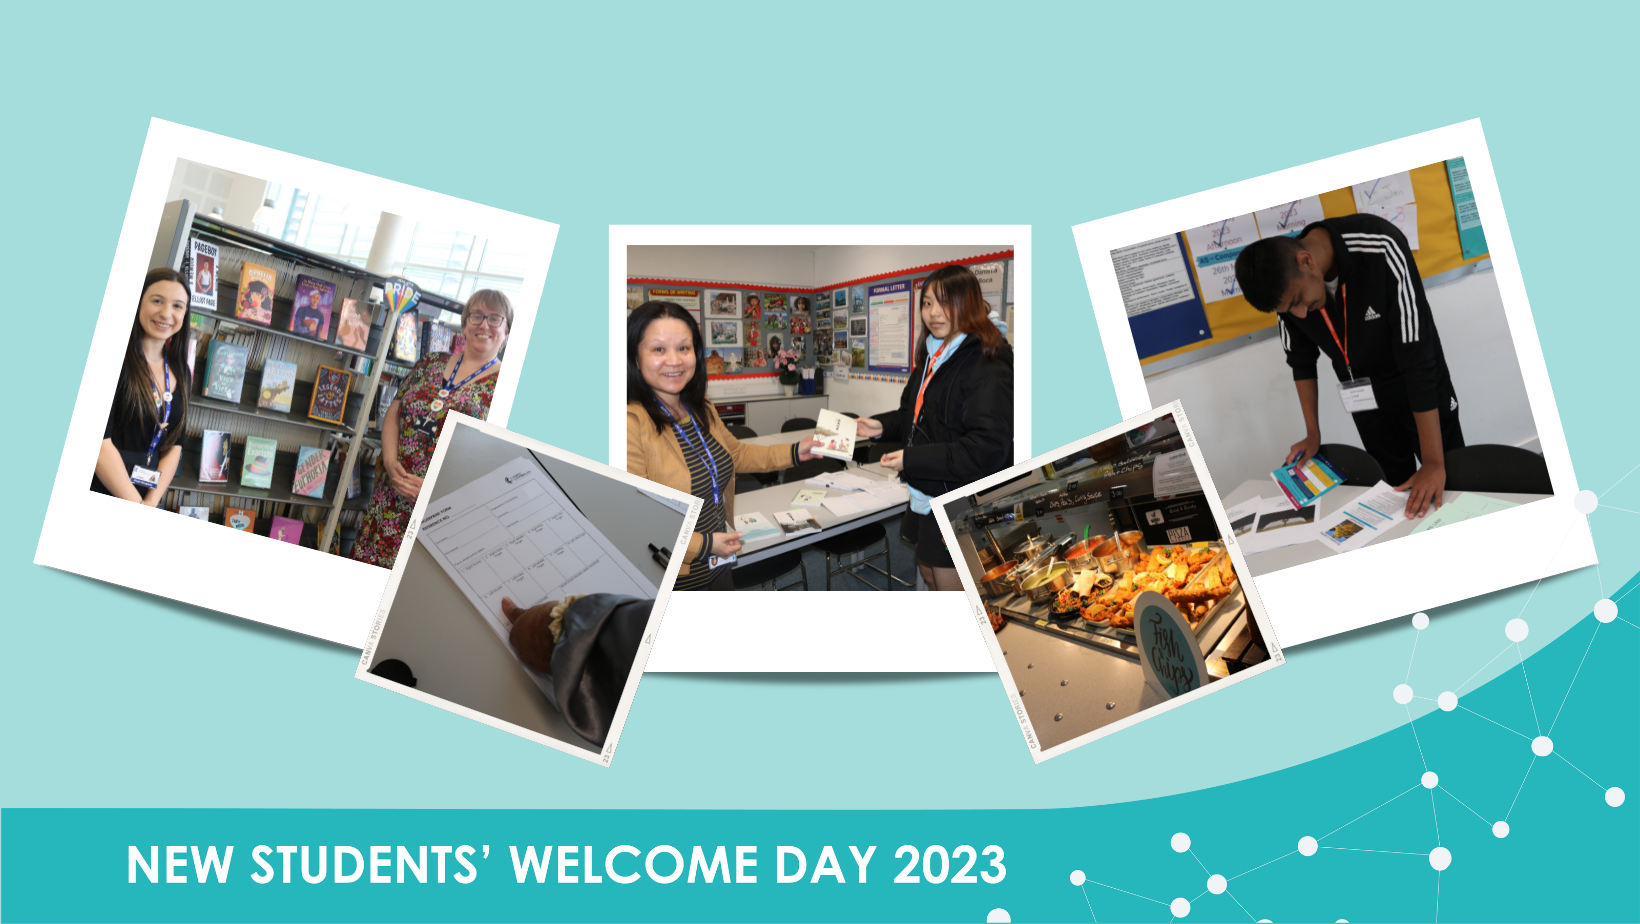 A compilation of photos from our New Students' Welcome Day 2023.